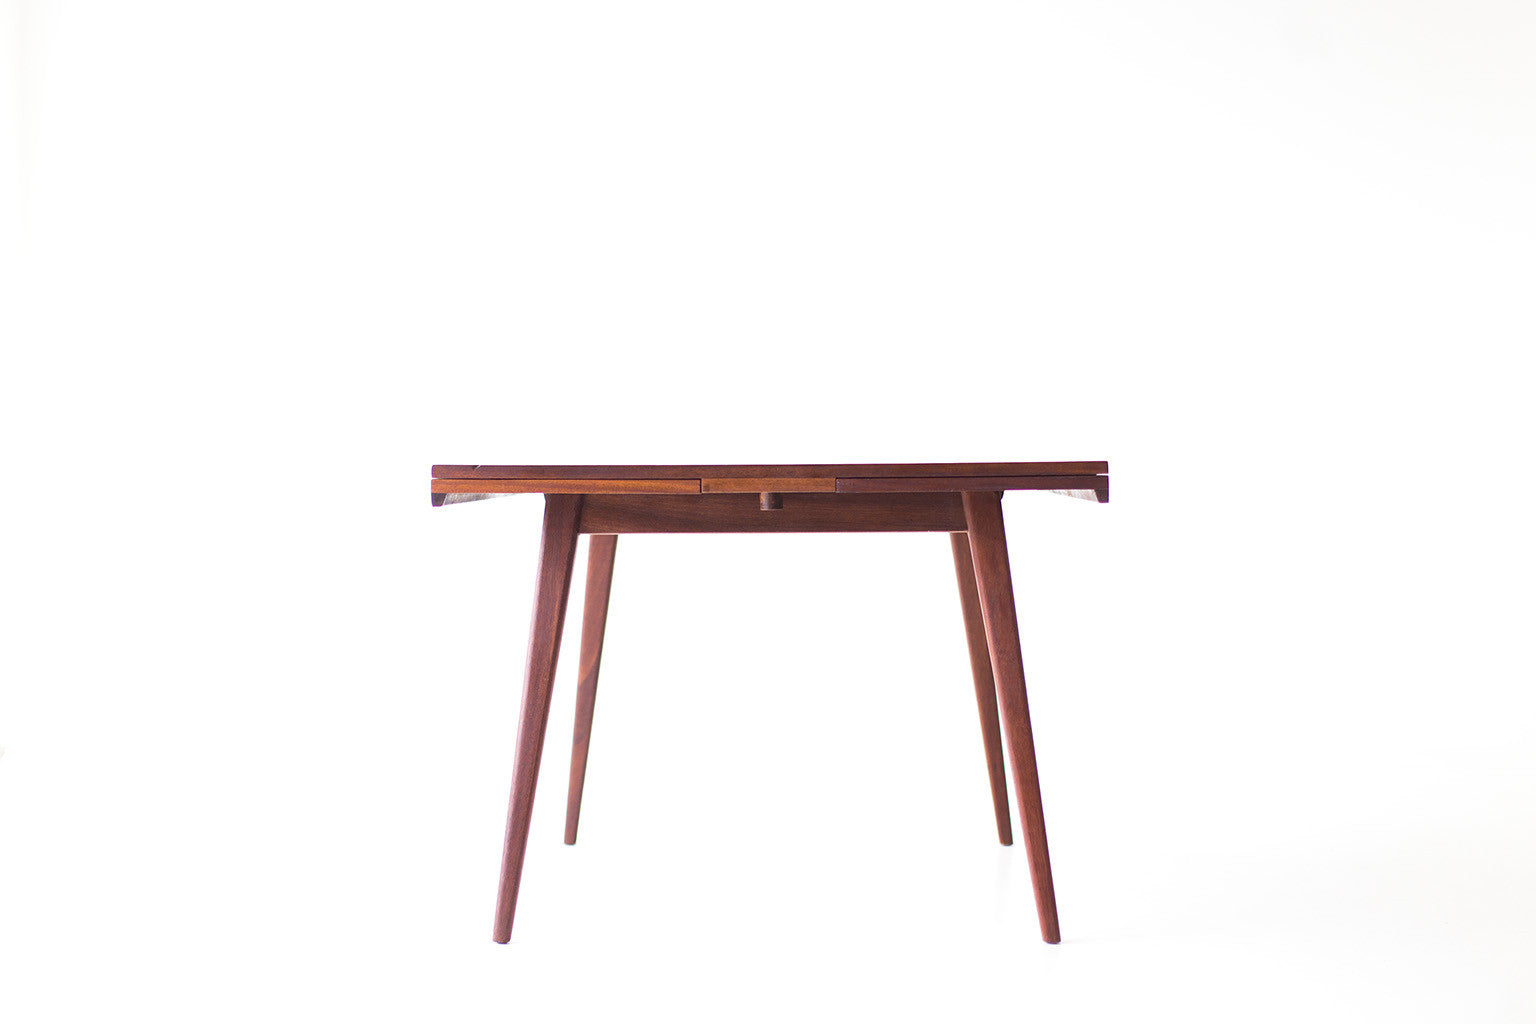 Early Jens Risom Dining Table - 01241601